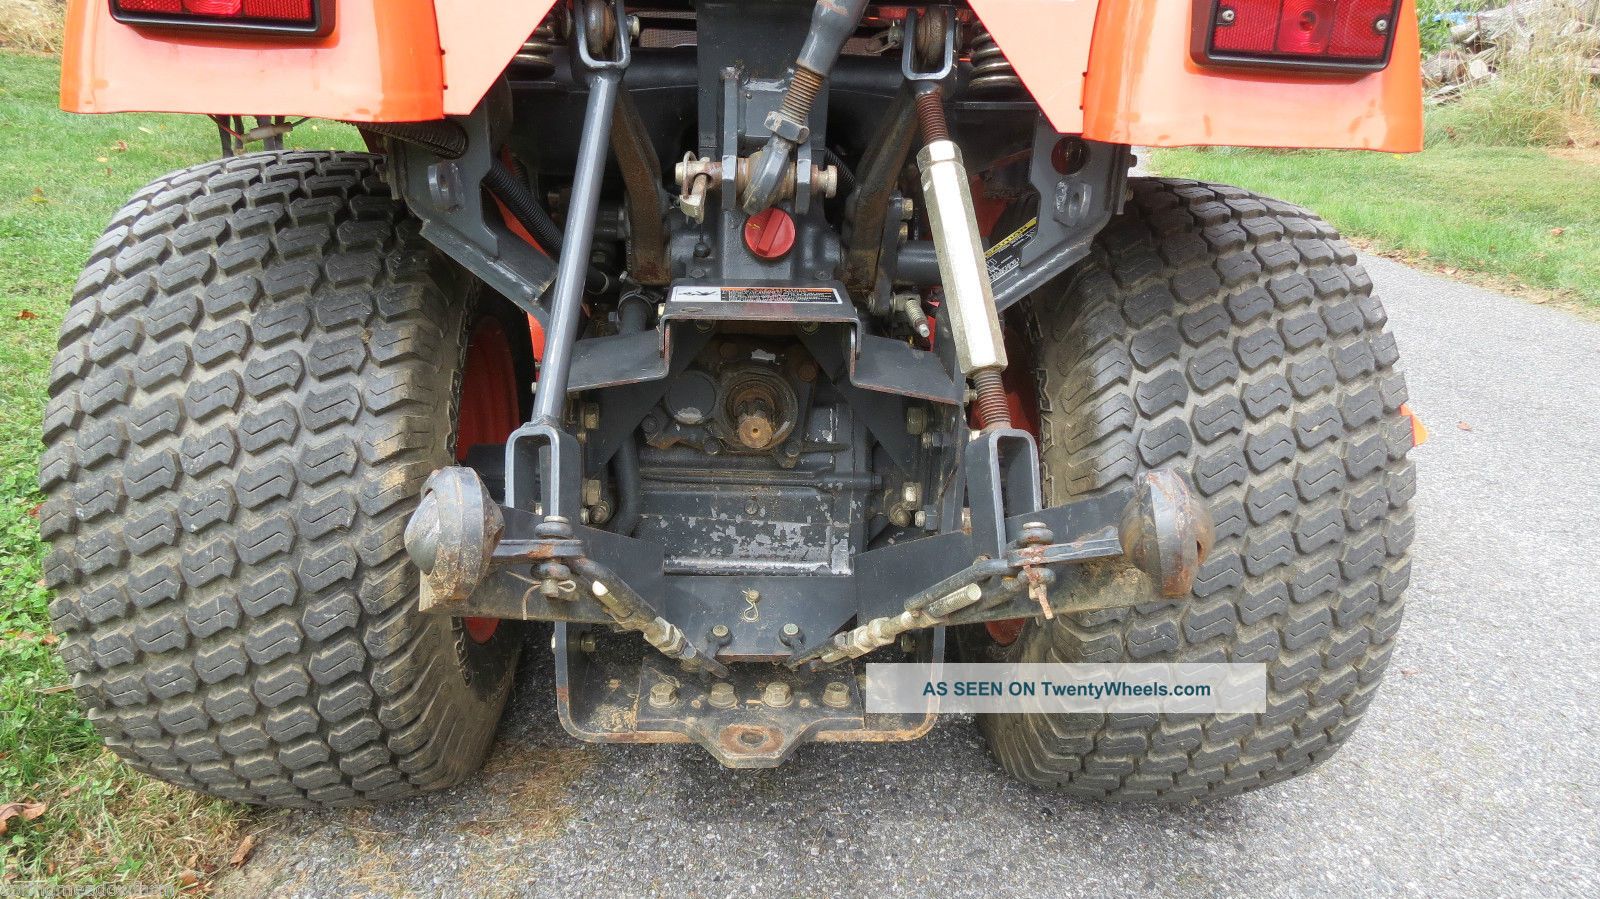 2004 Kubota Bx2230 4x4 Compact Tractor W/ Loader Belly Mower Hydro 647 Hour...